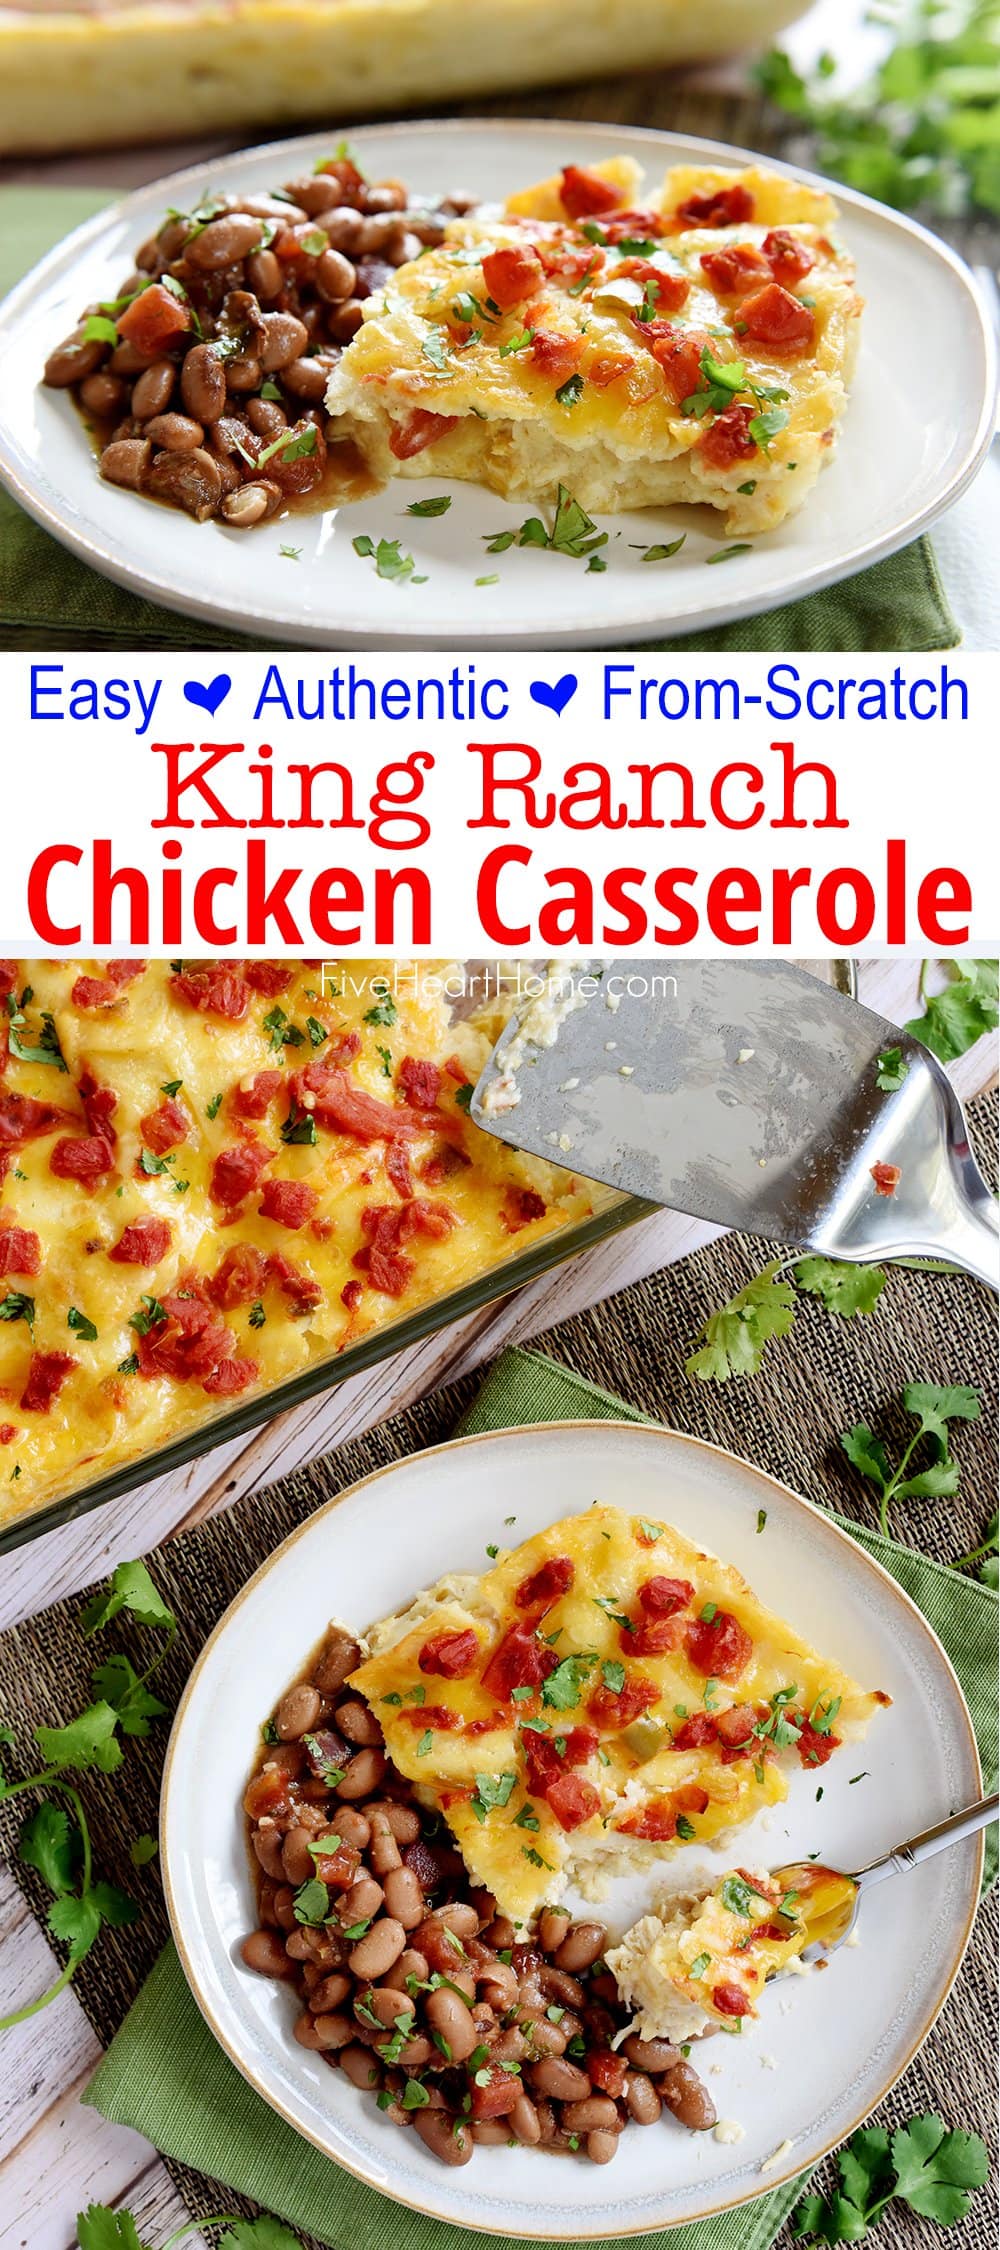 King Ranch Chicken Casserole ~ a cozy, comfort food classic with melty layers of chicken, tortillas, and cheese...and this authentic, from-scratch version features a simple homemade sauce with NO canned condensed soups! | FiveHeartHome.com via @fivehearthome